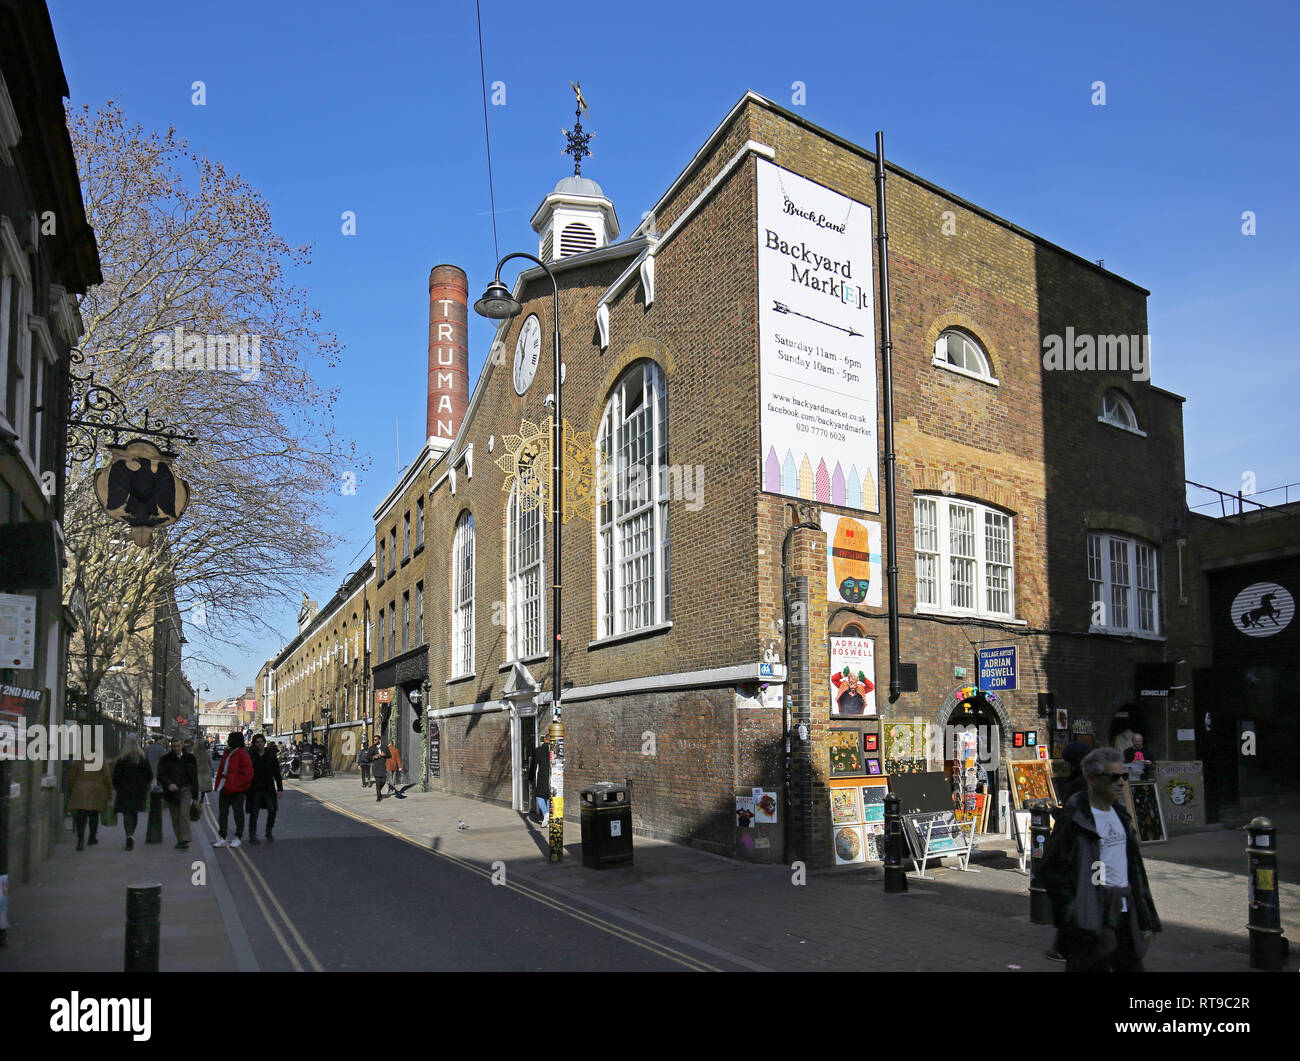 The old Truman Brewery building on Brick Lane in London's east-end  Whitechapel district. Stock Photo